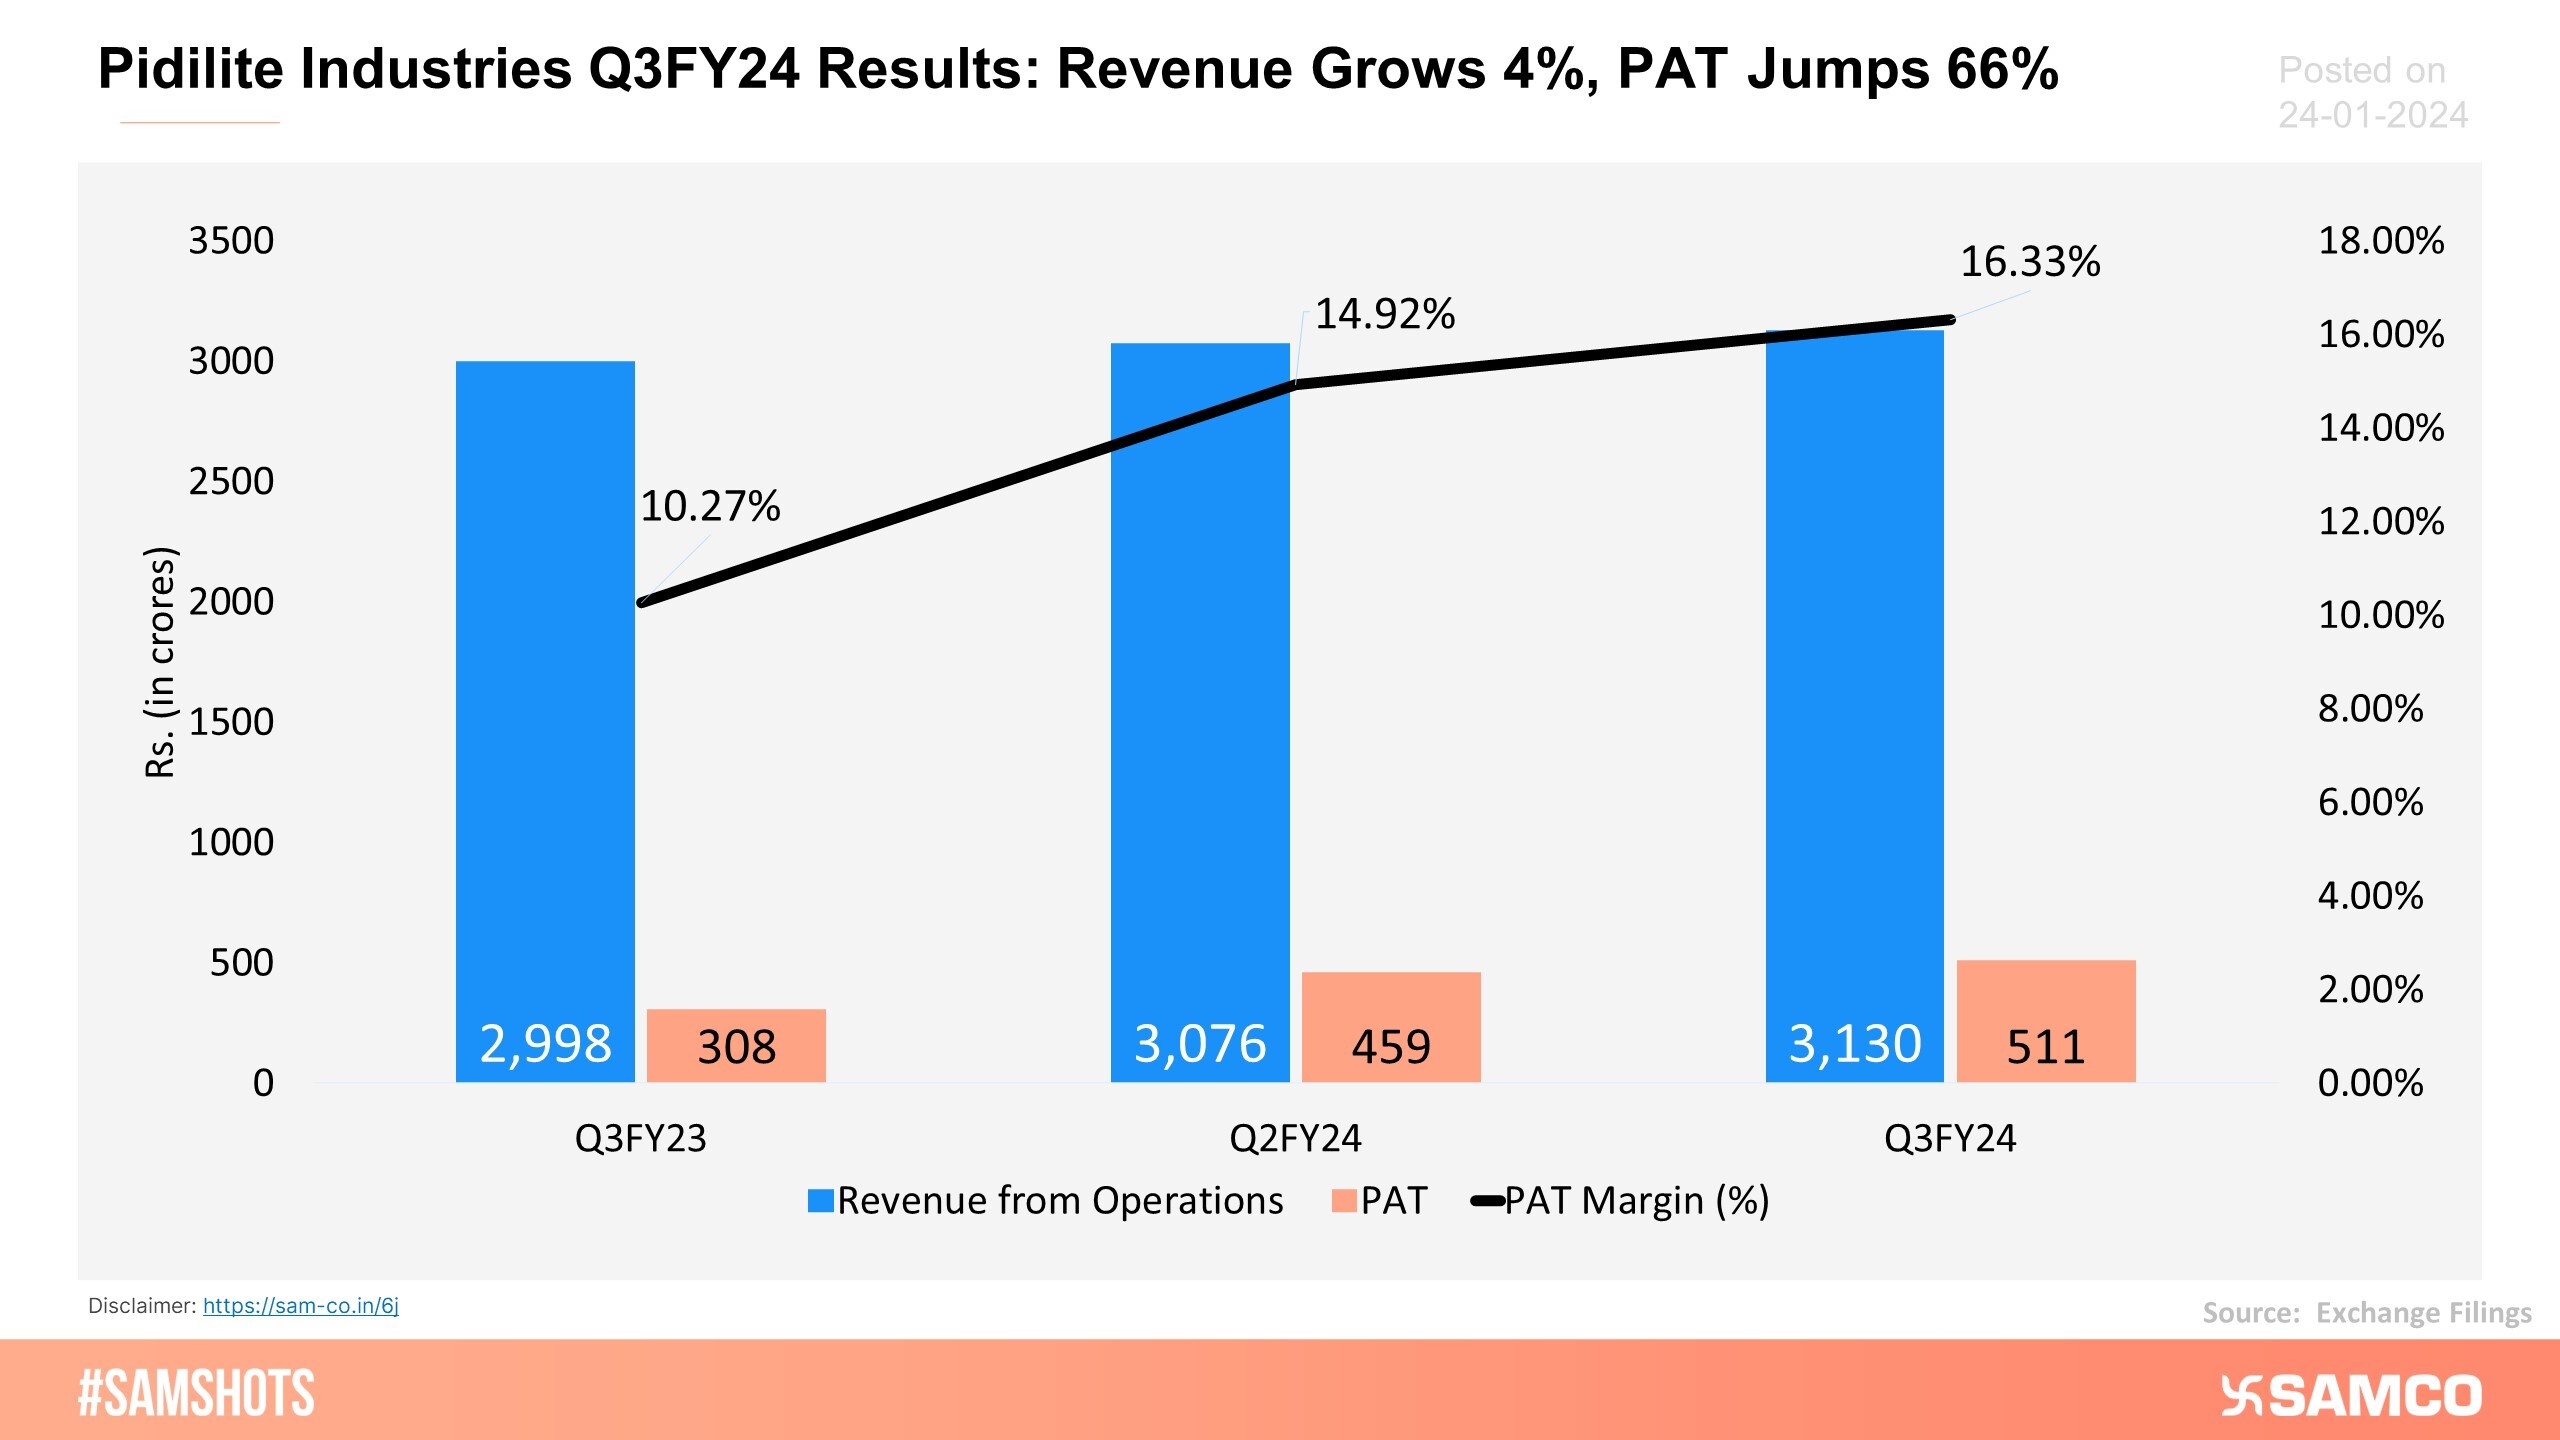 The chart shows the Q3FY24 results of Pidilite Industries.